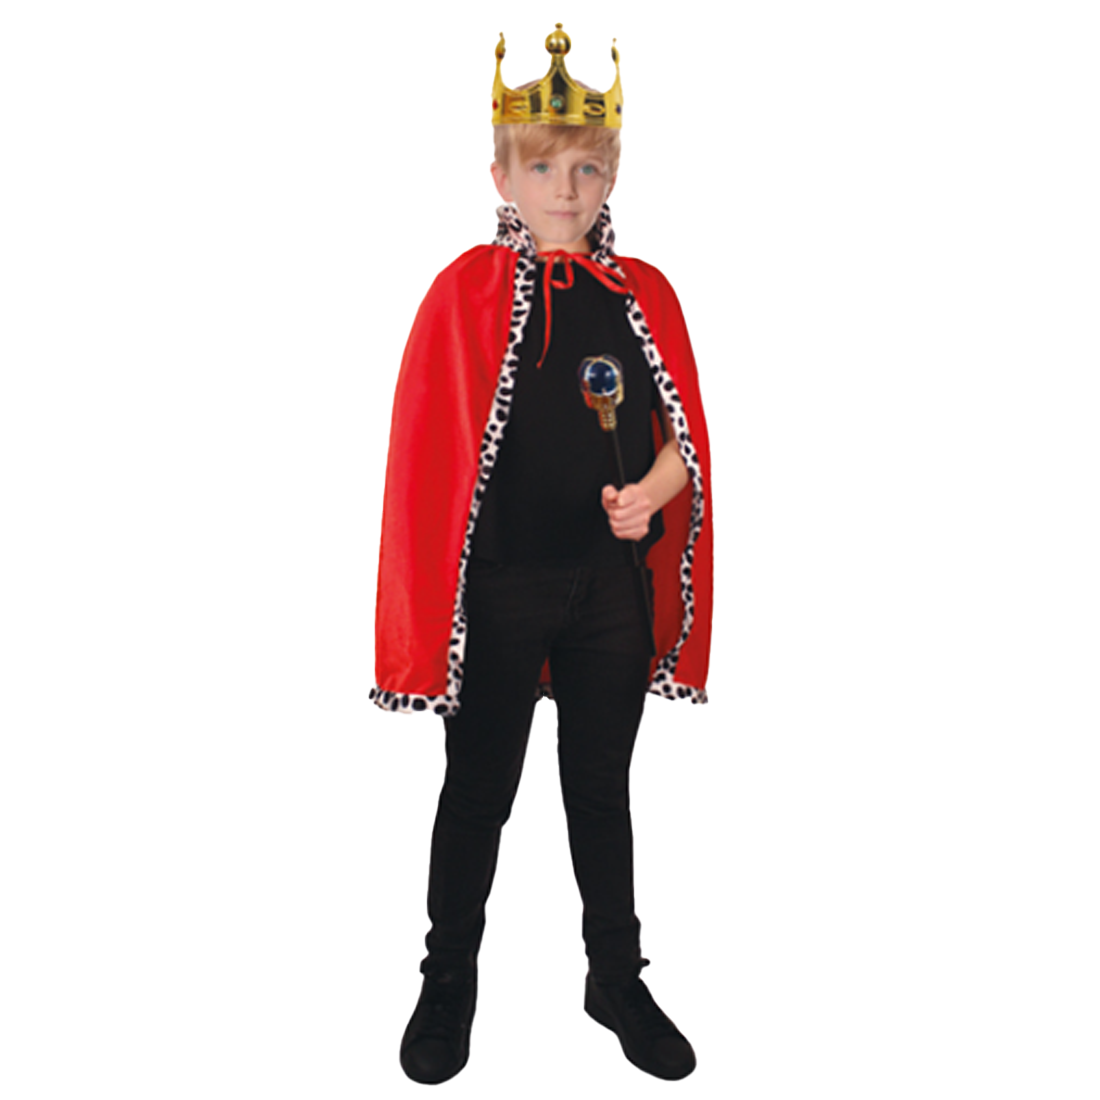 Childs King or Queen Red Cape